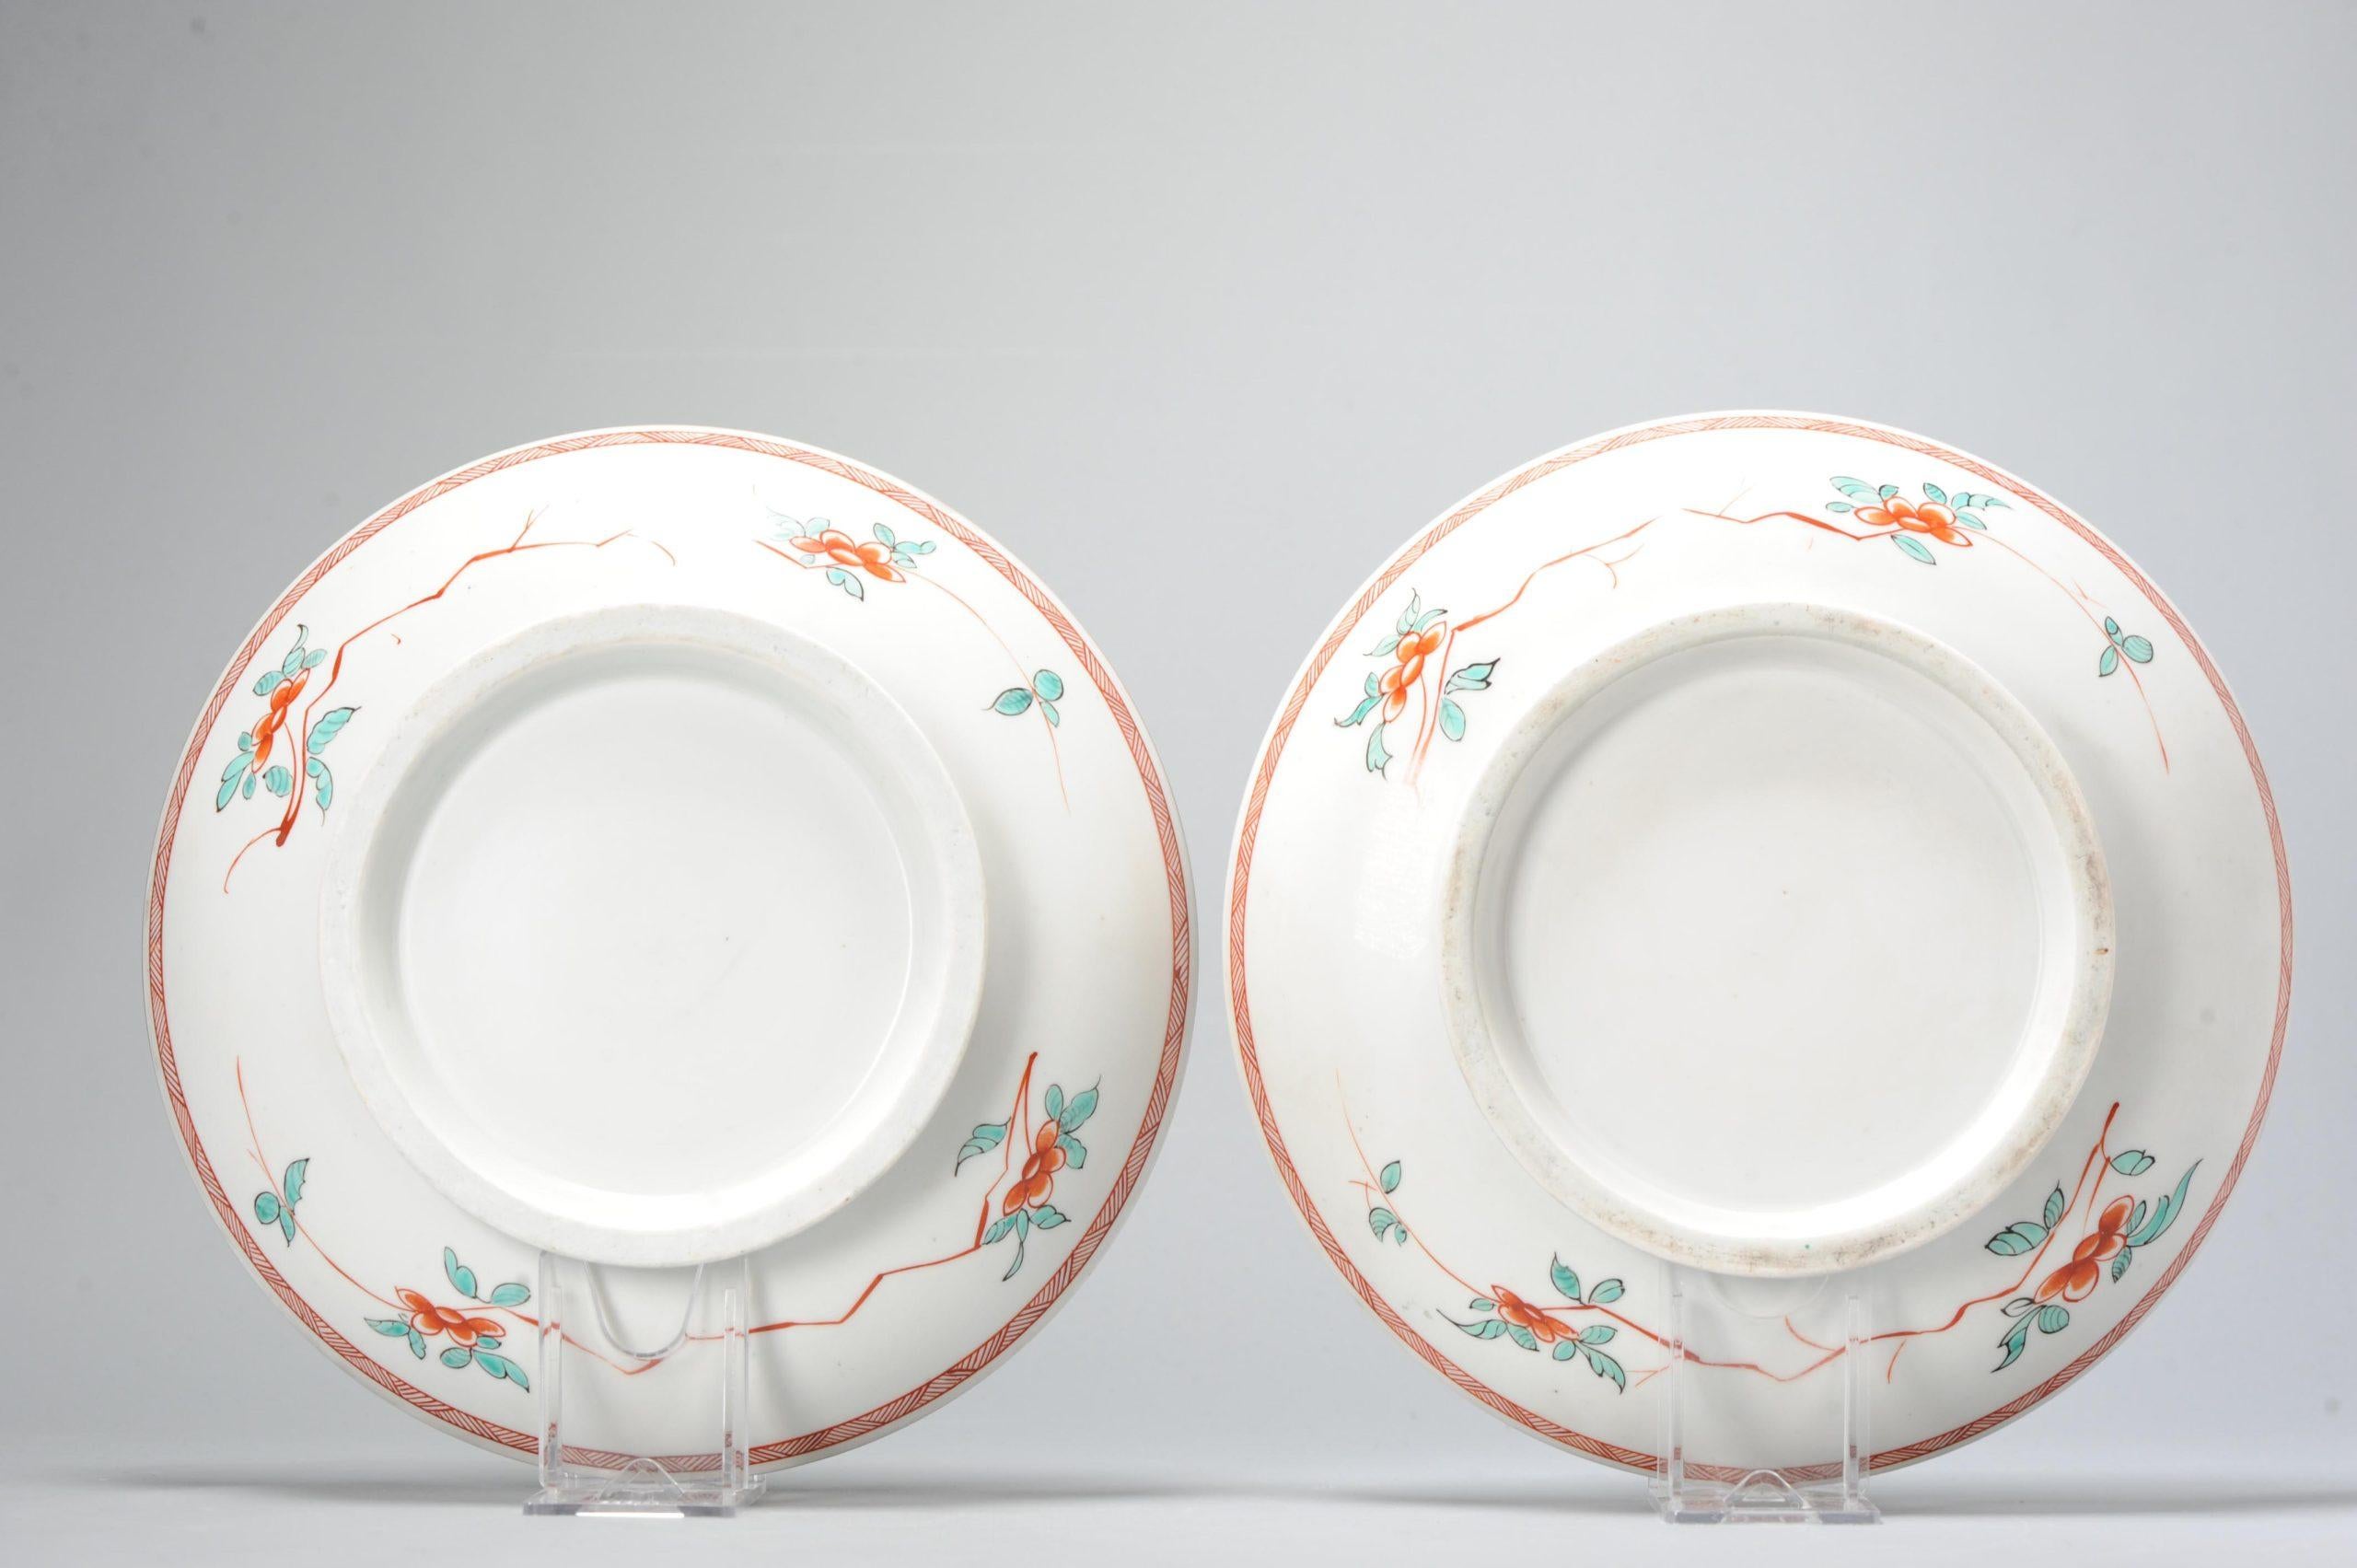 Antique France Porcelain Famille Rose Dishes Famille Verte French, 19 Century In Good Condition For Sale In Amsterdam, Noord Holland